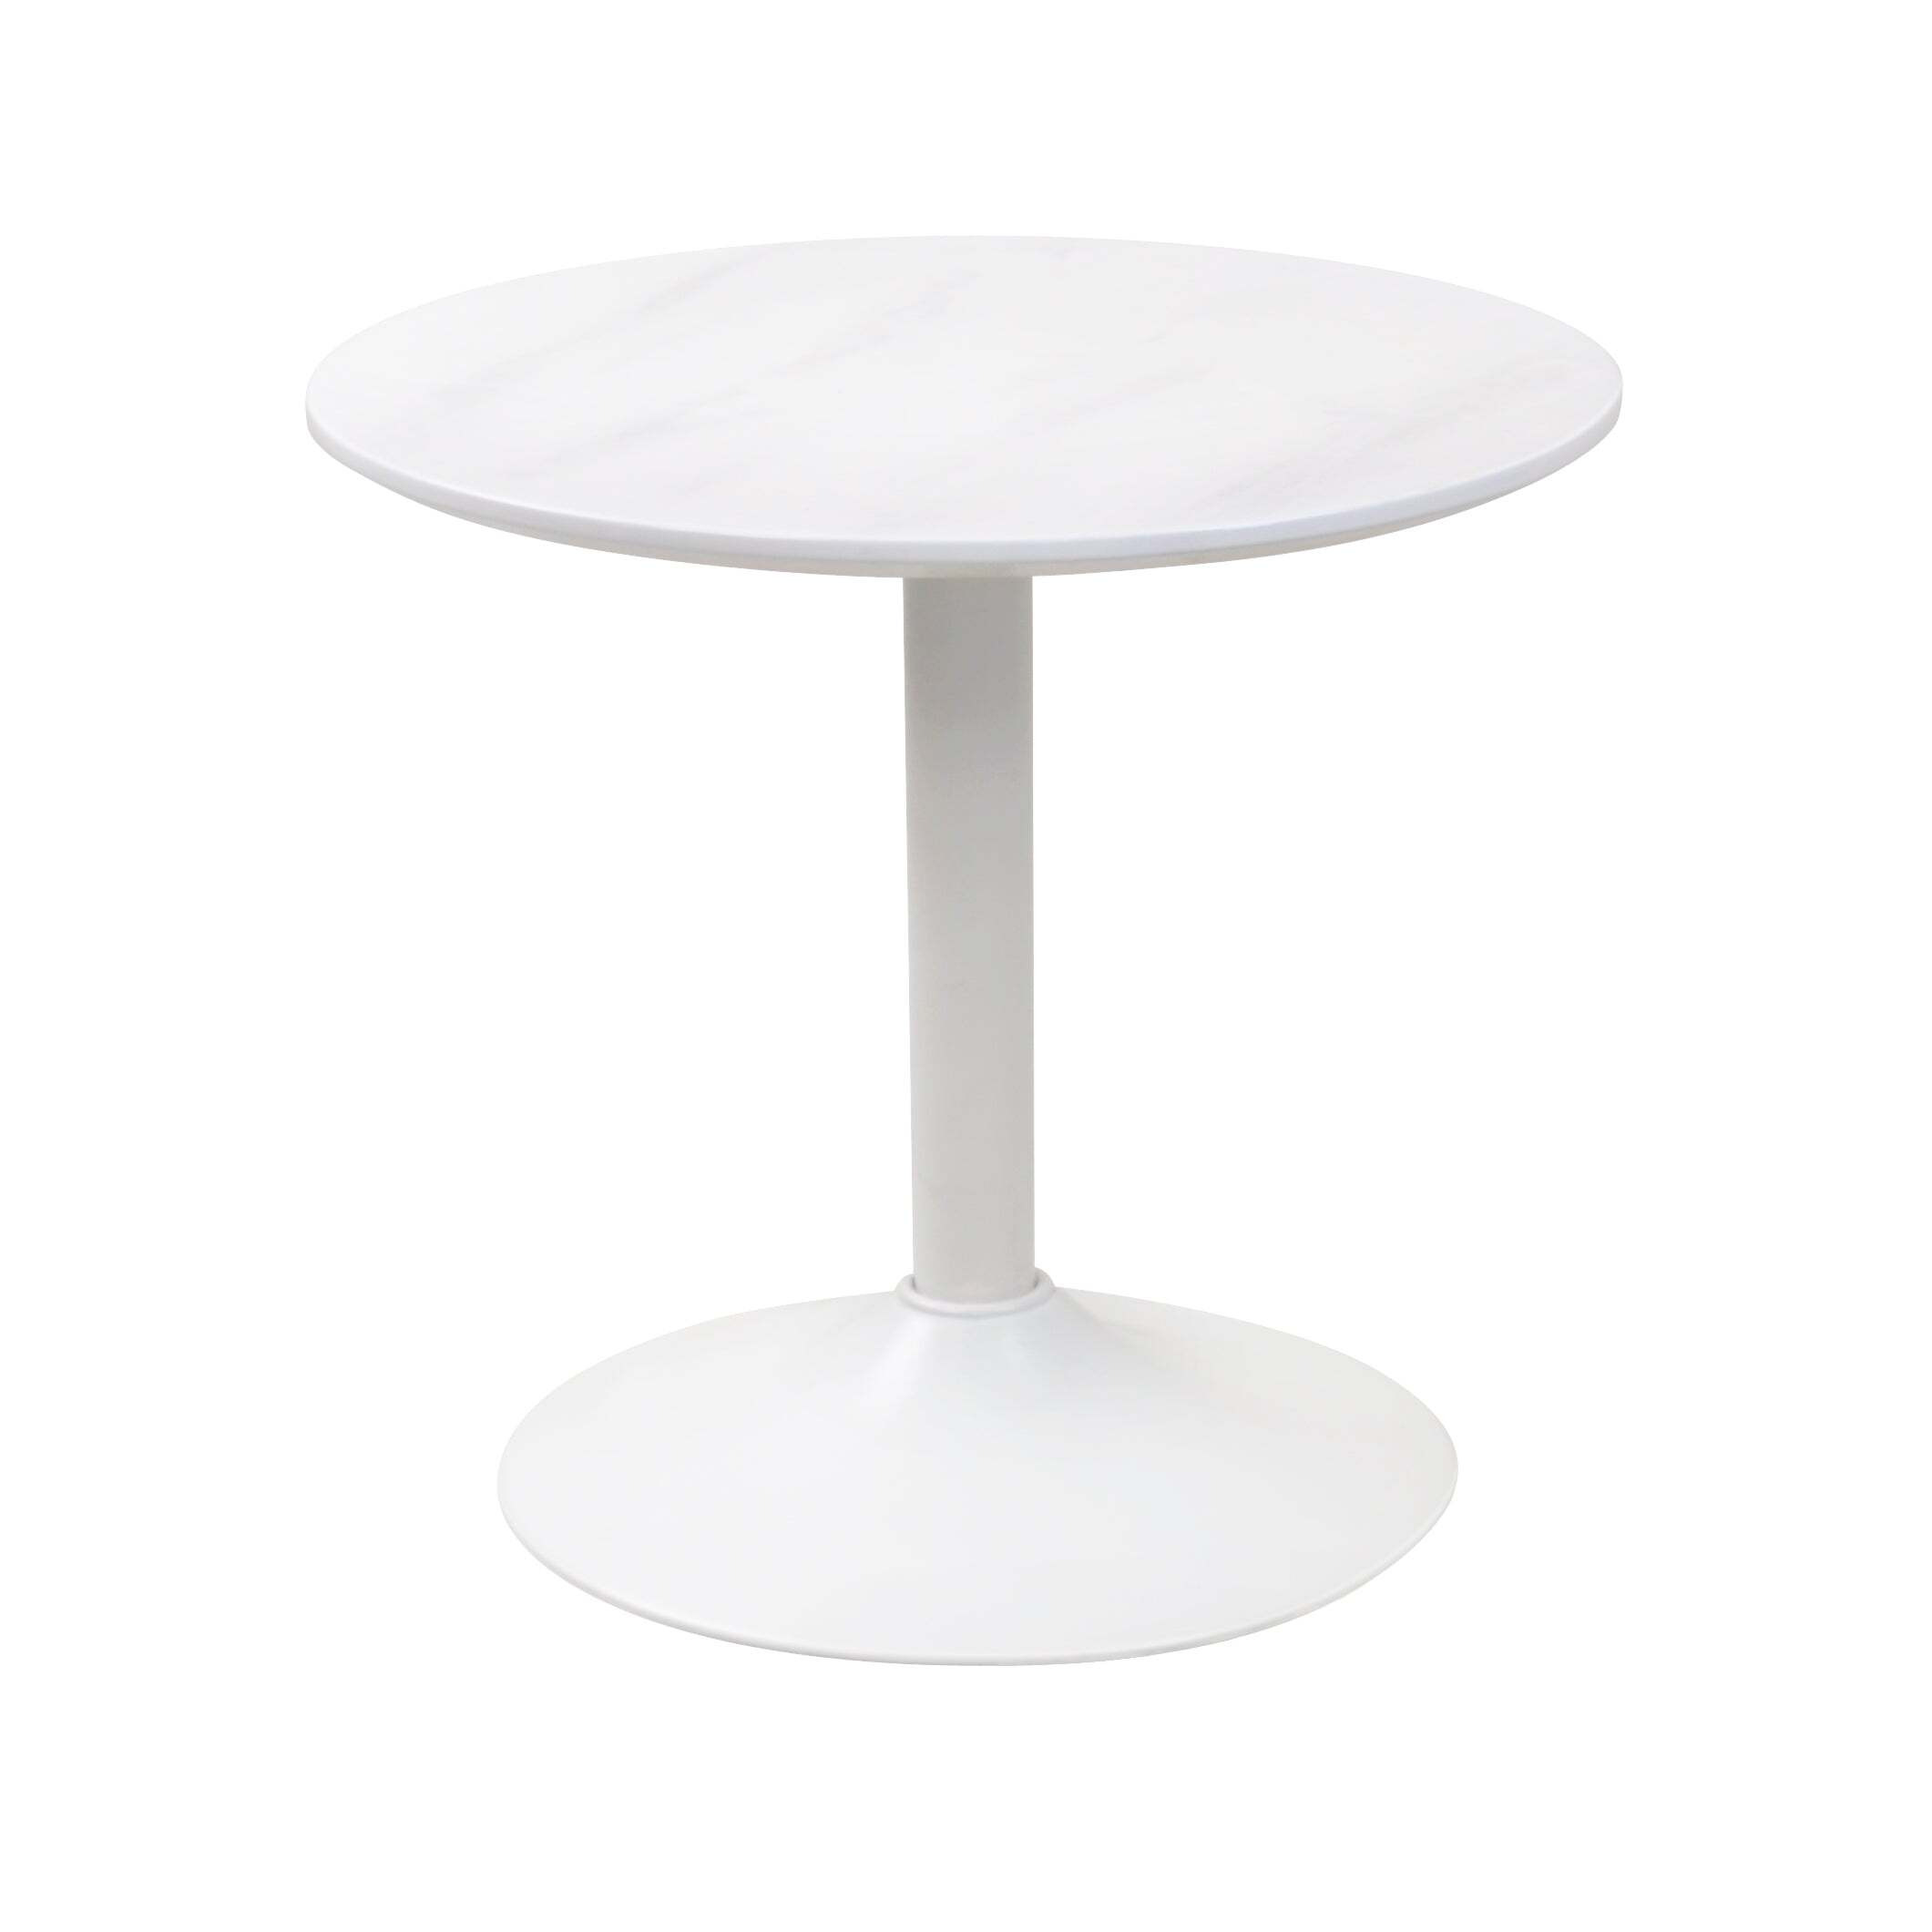 Teddy's Collection Hallie Lamp Table - image 1